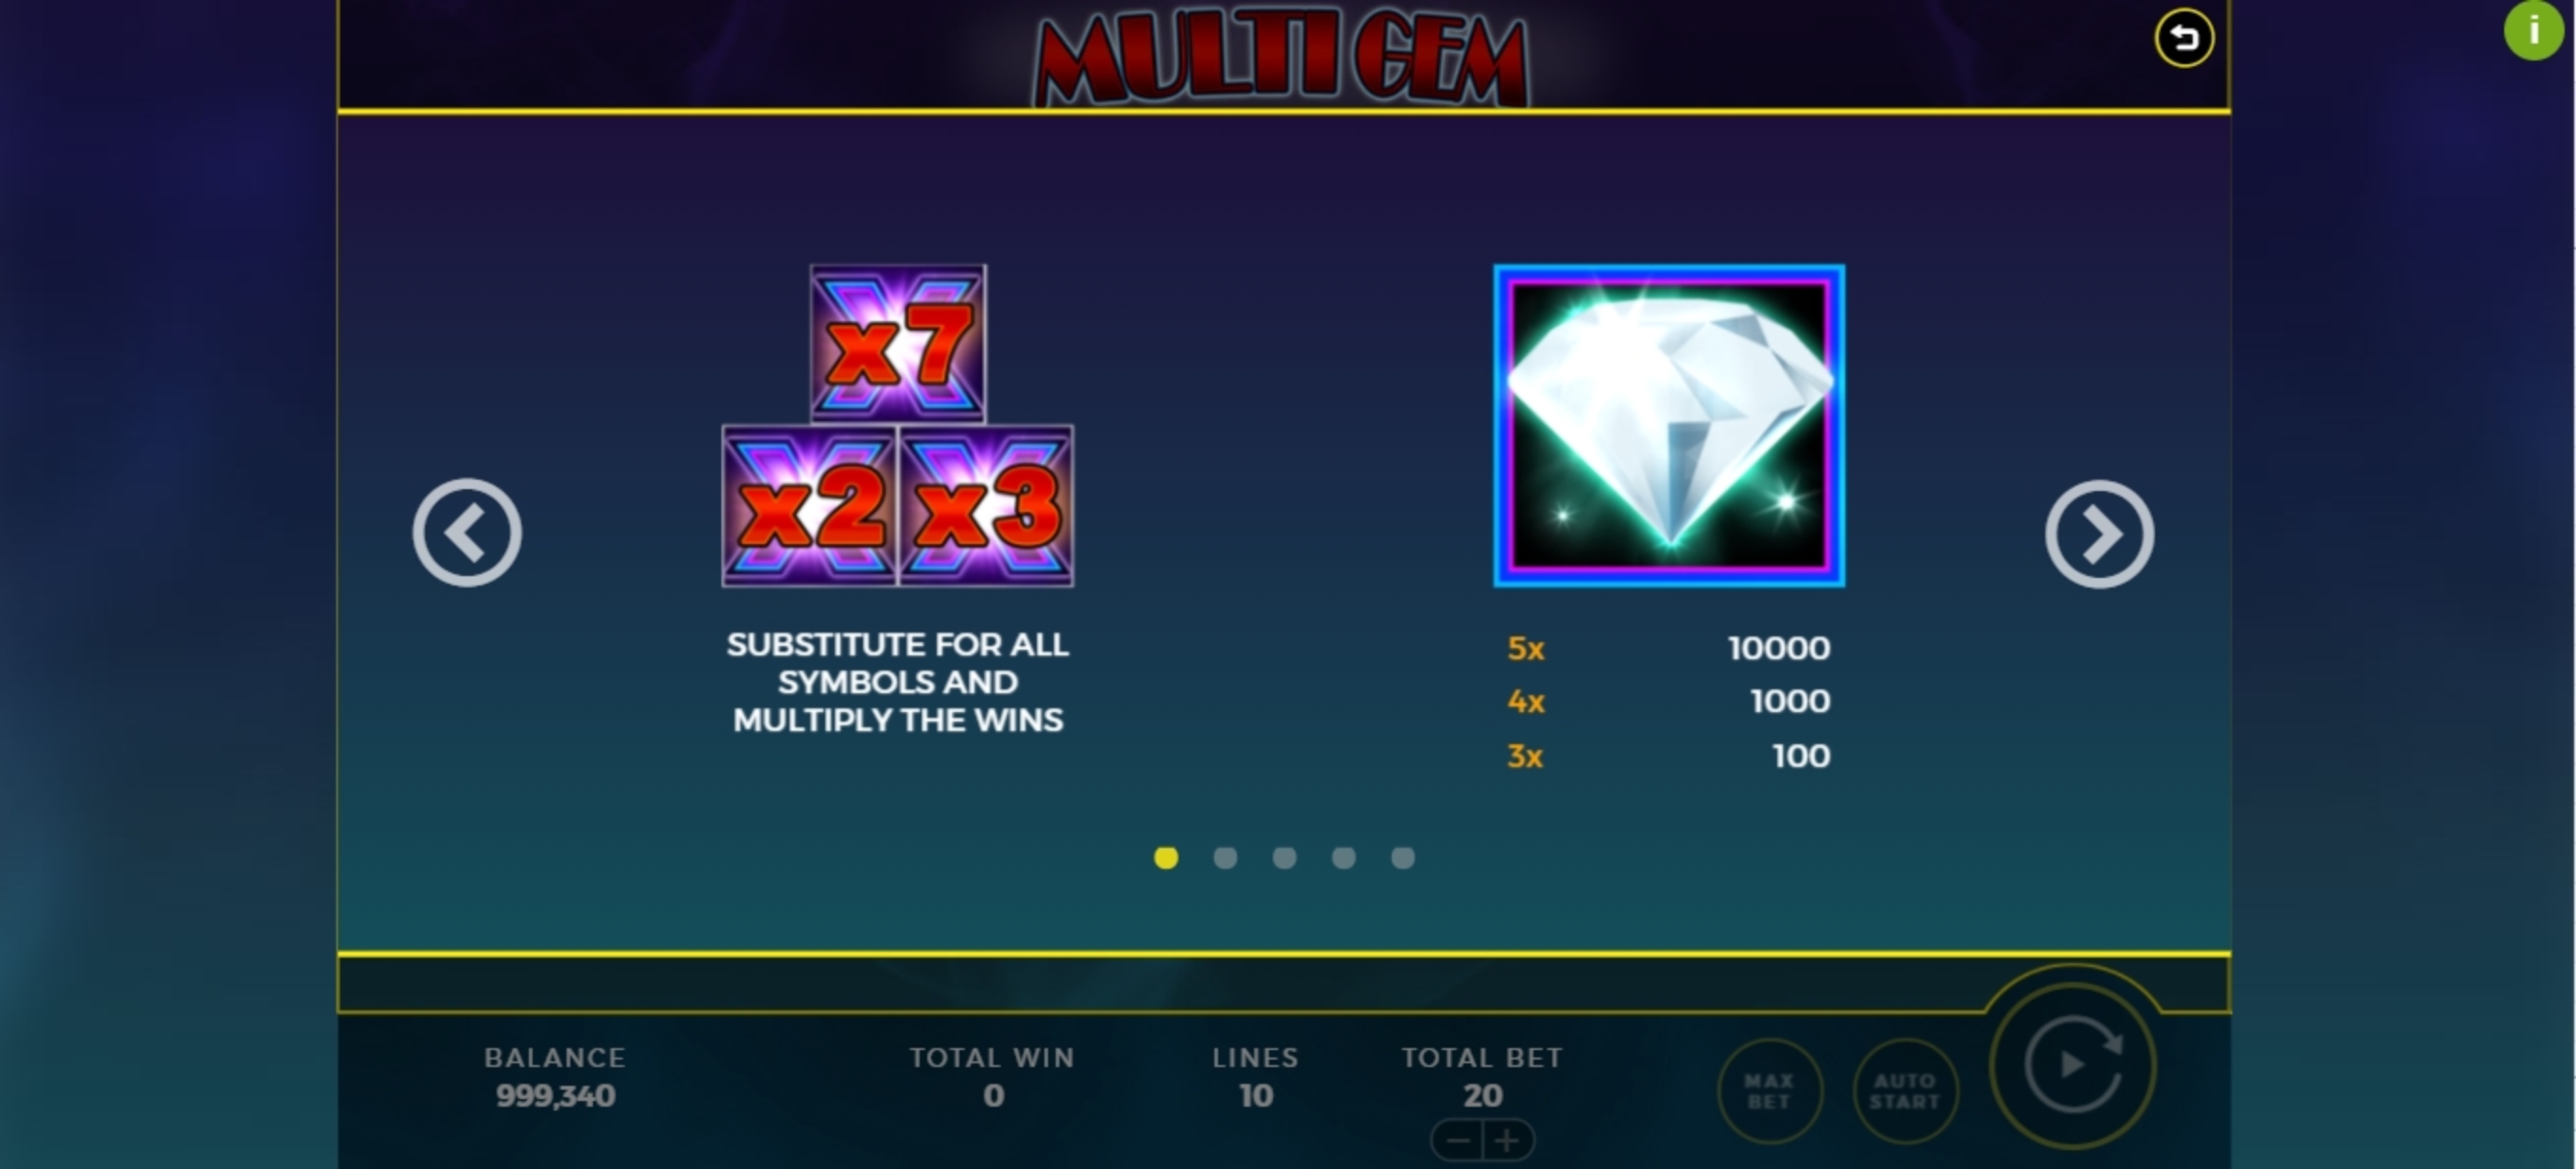 Info of Multi Gem Slot Game by Bally Wulff